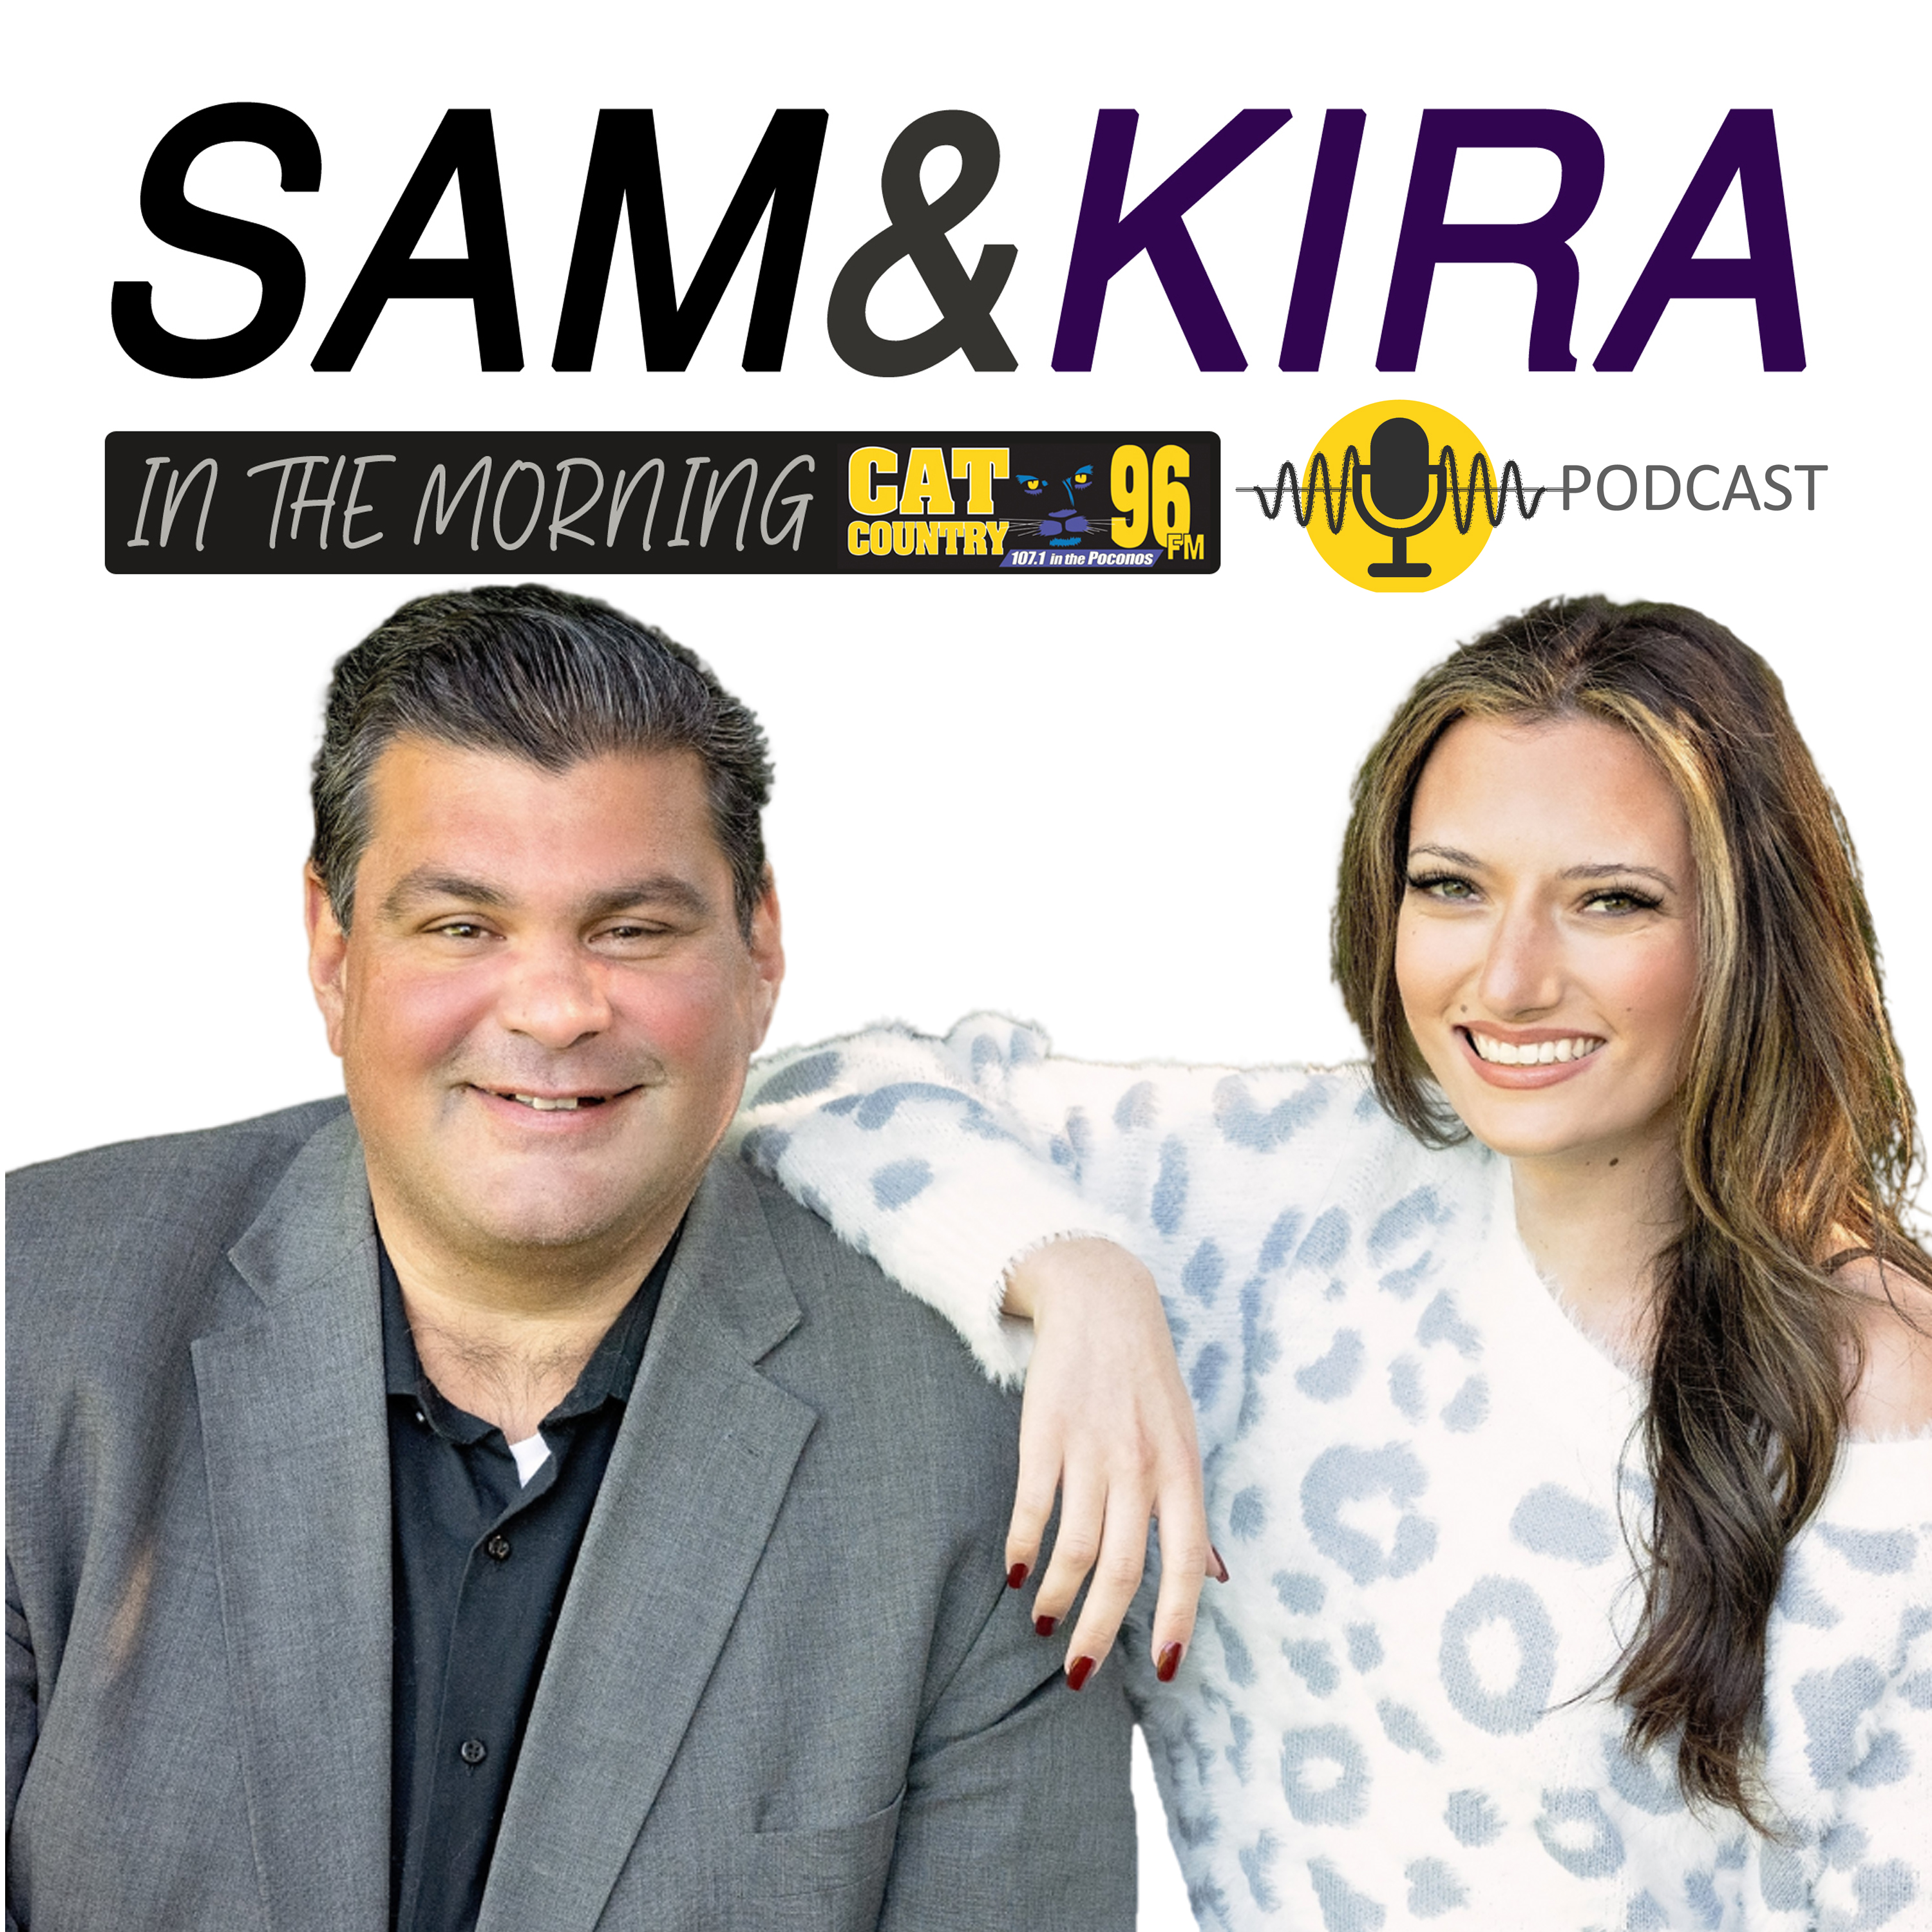 Sam & Kira After Breakfast: Is Thanksgiving Overrated?